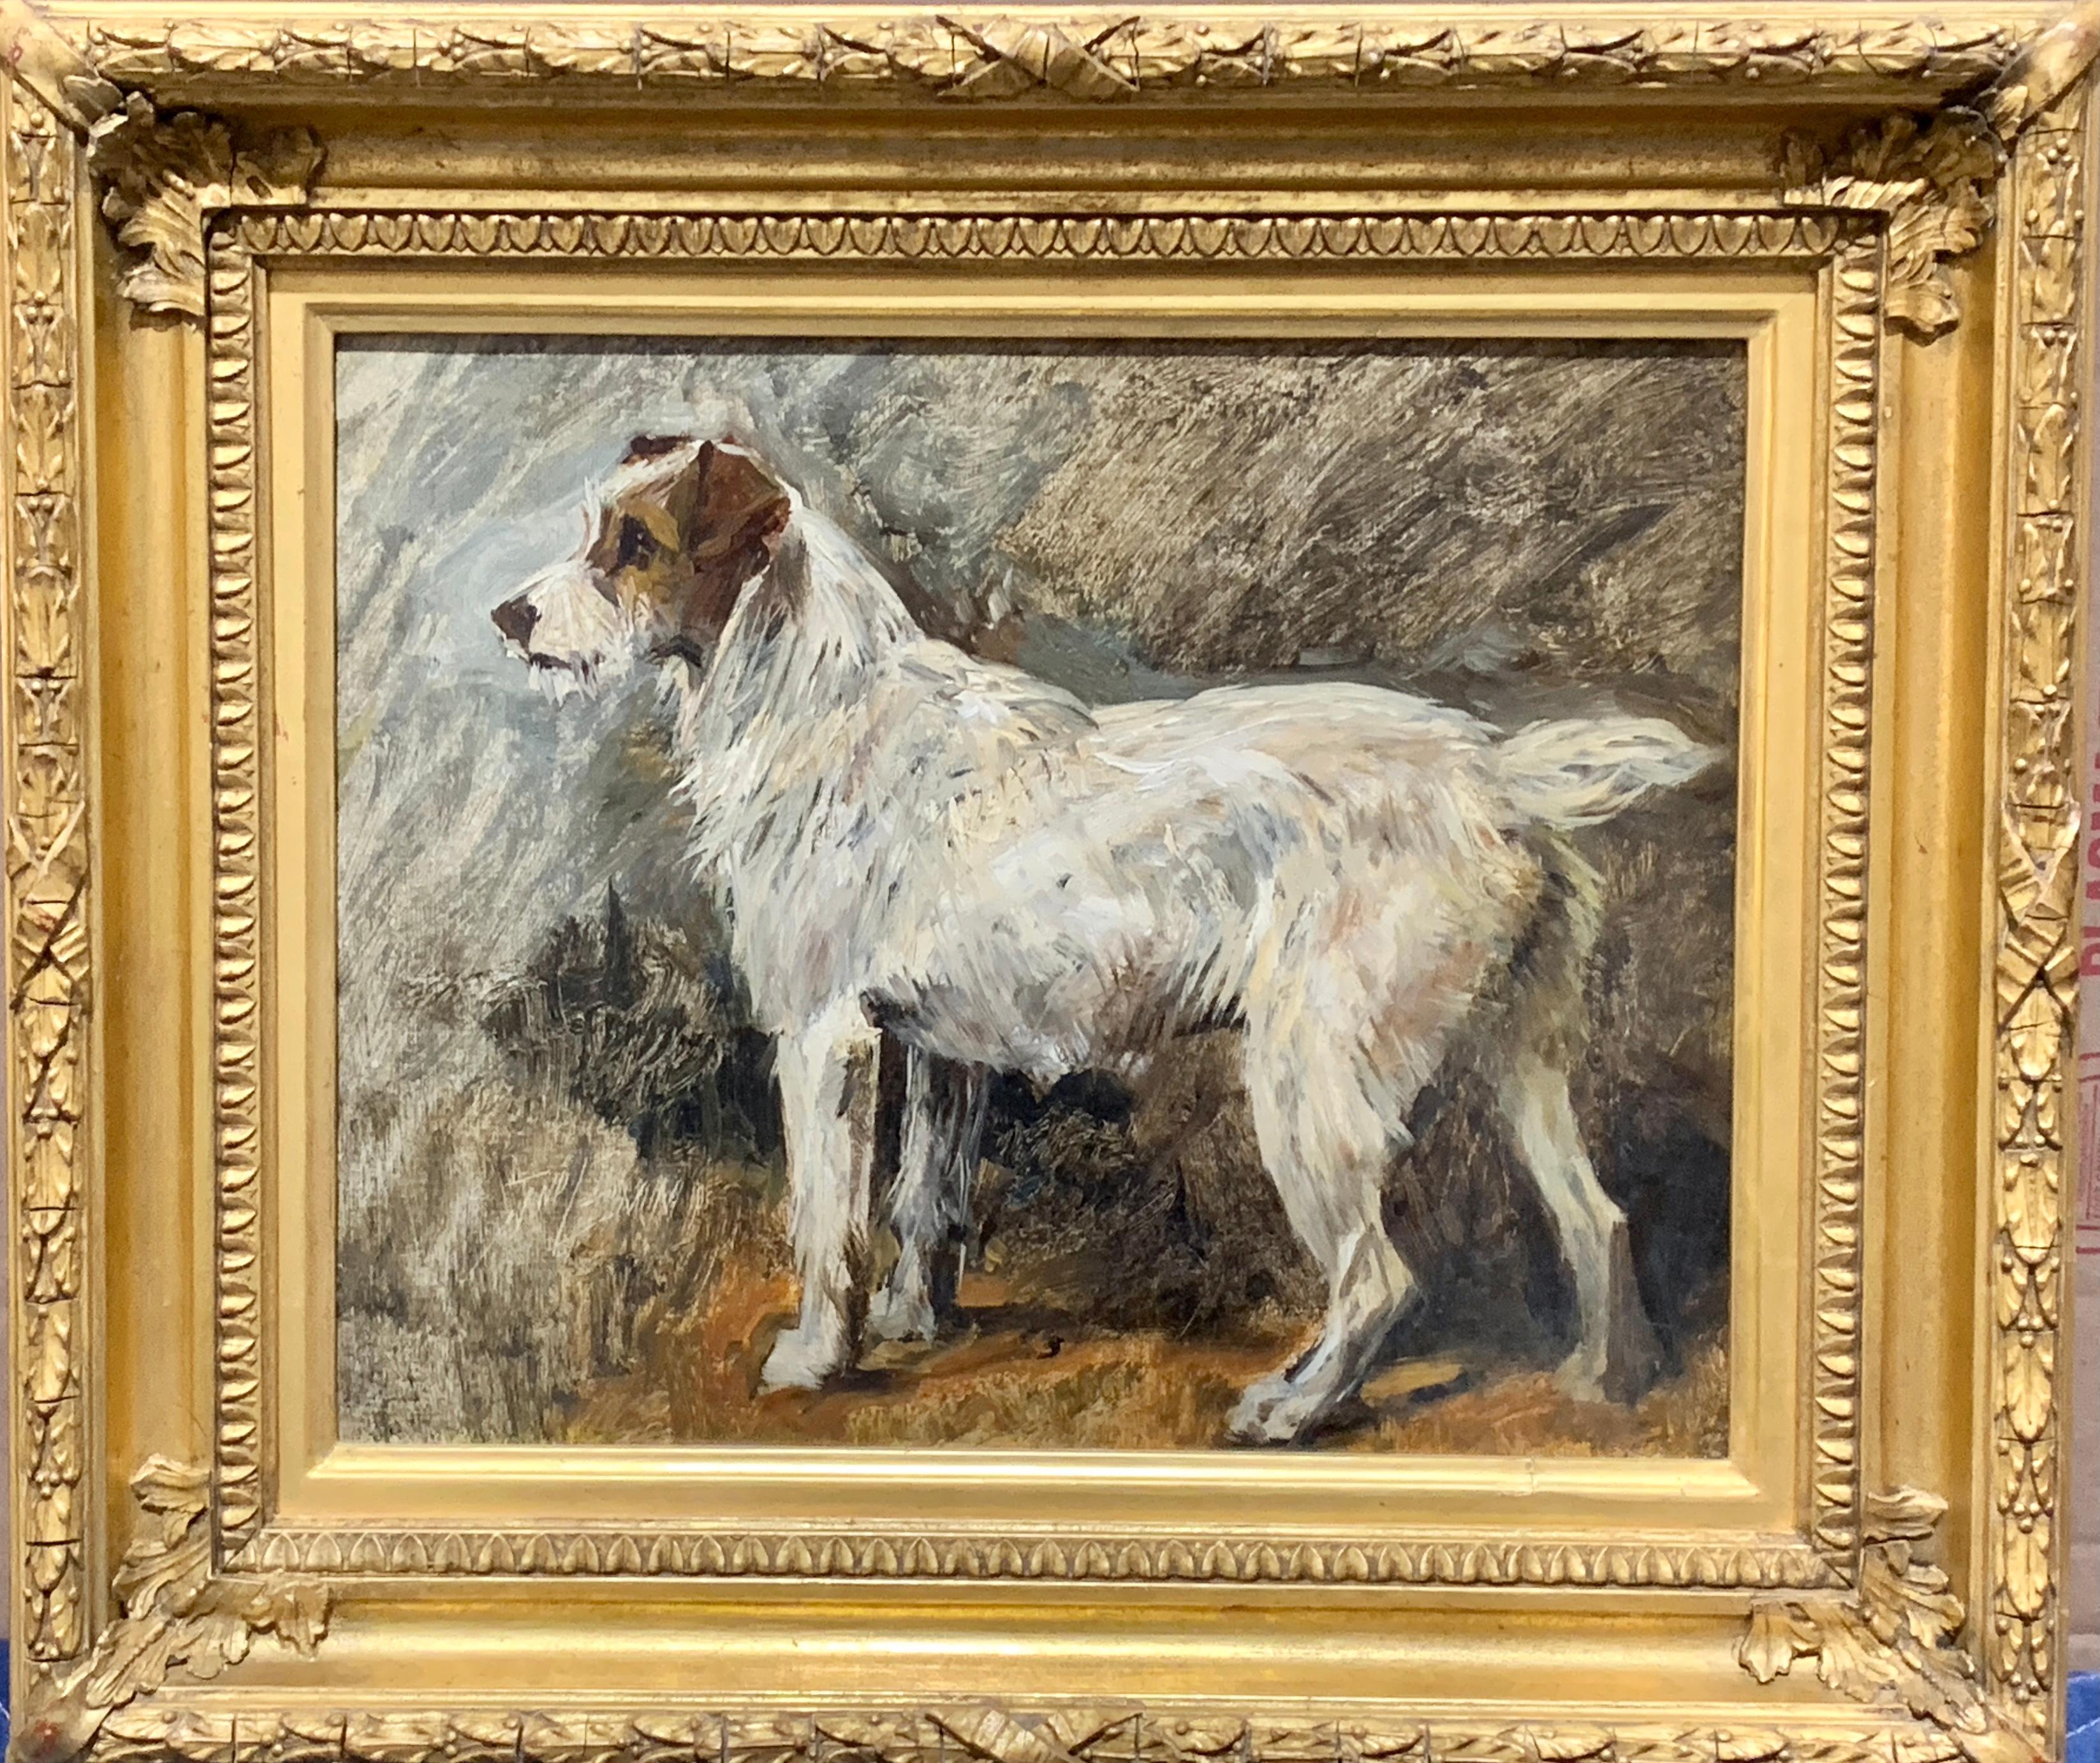 Early 20th Century English portrait of an English Jack Russell terrier dog - Painting by John Emms